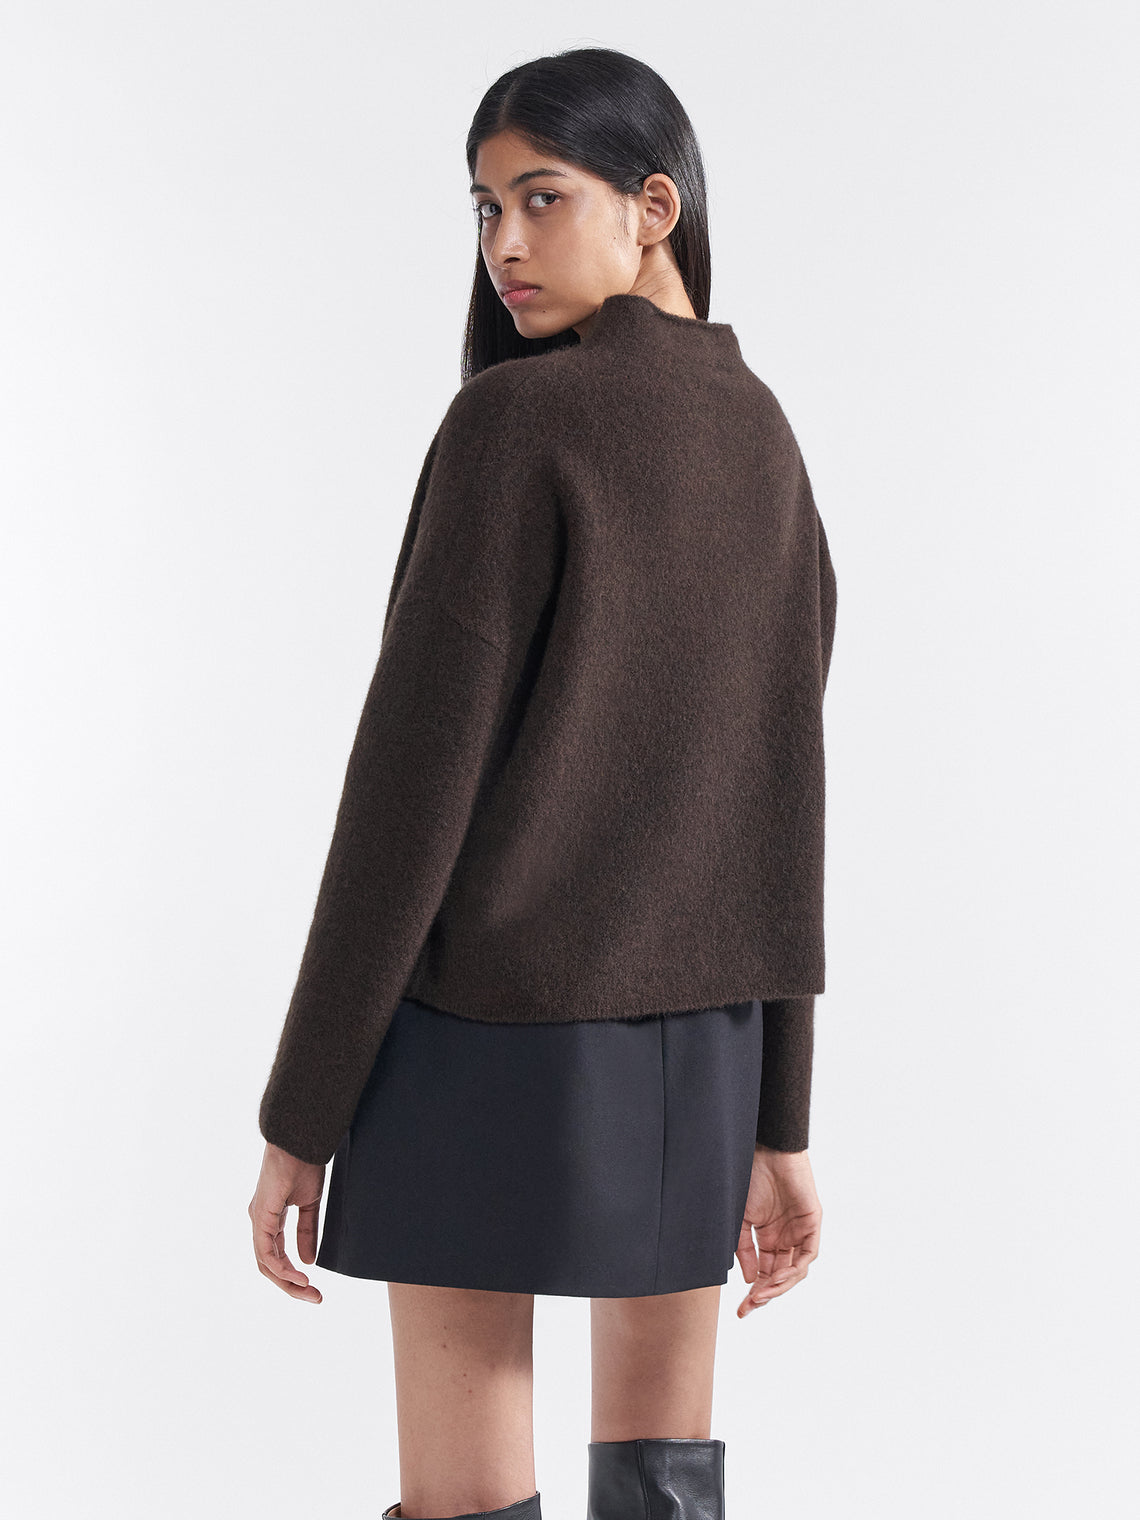 Mika yak funnelneck knitted sweater by Filippa K - ginger brown